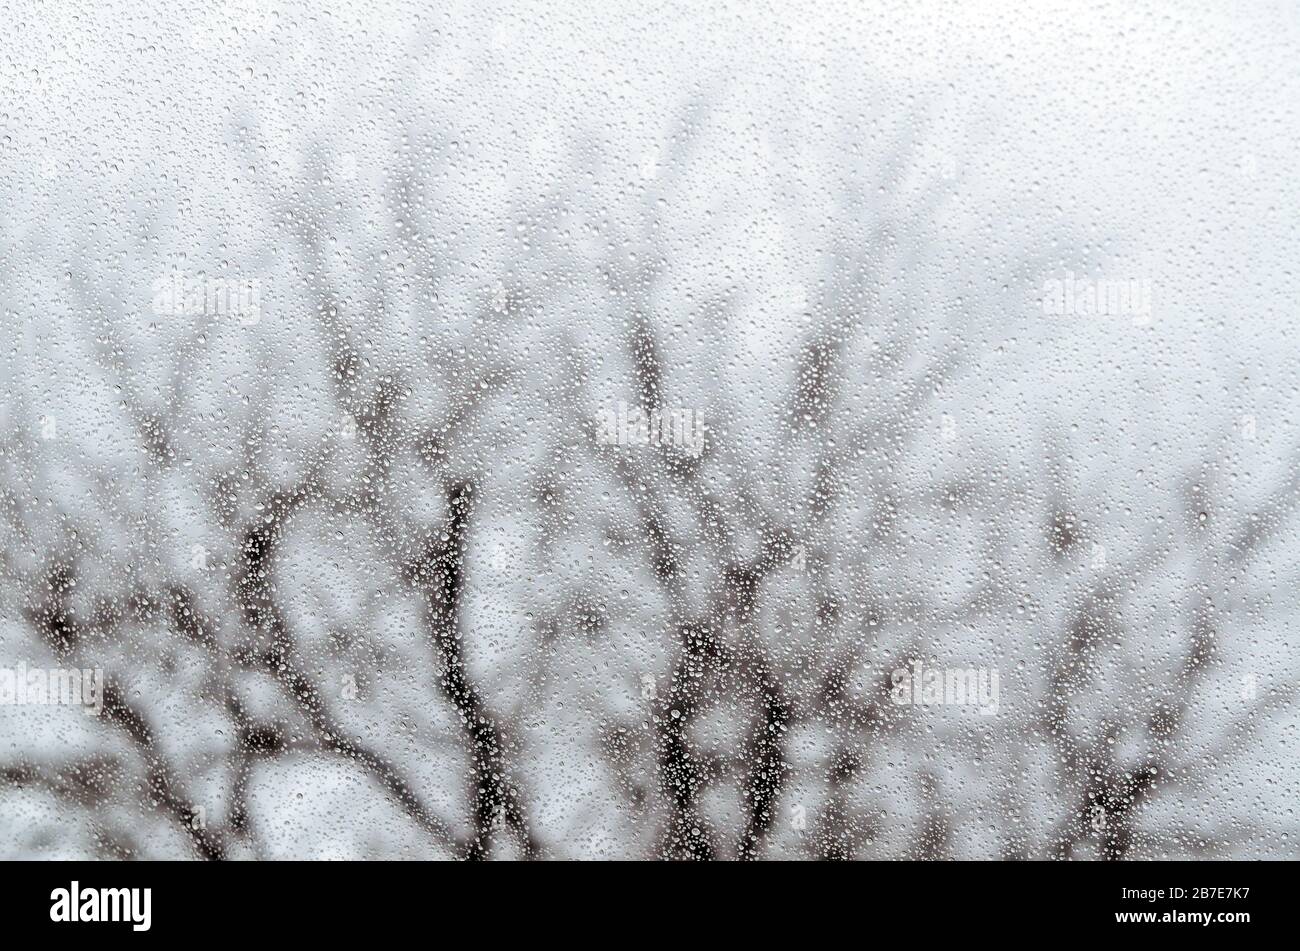 Rain on window with barren tree branches in background Stock Photo